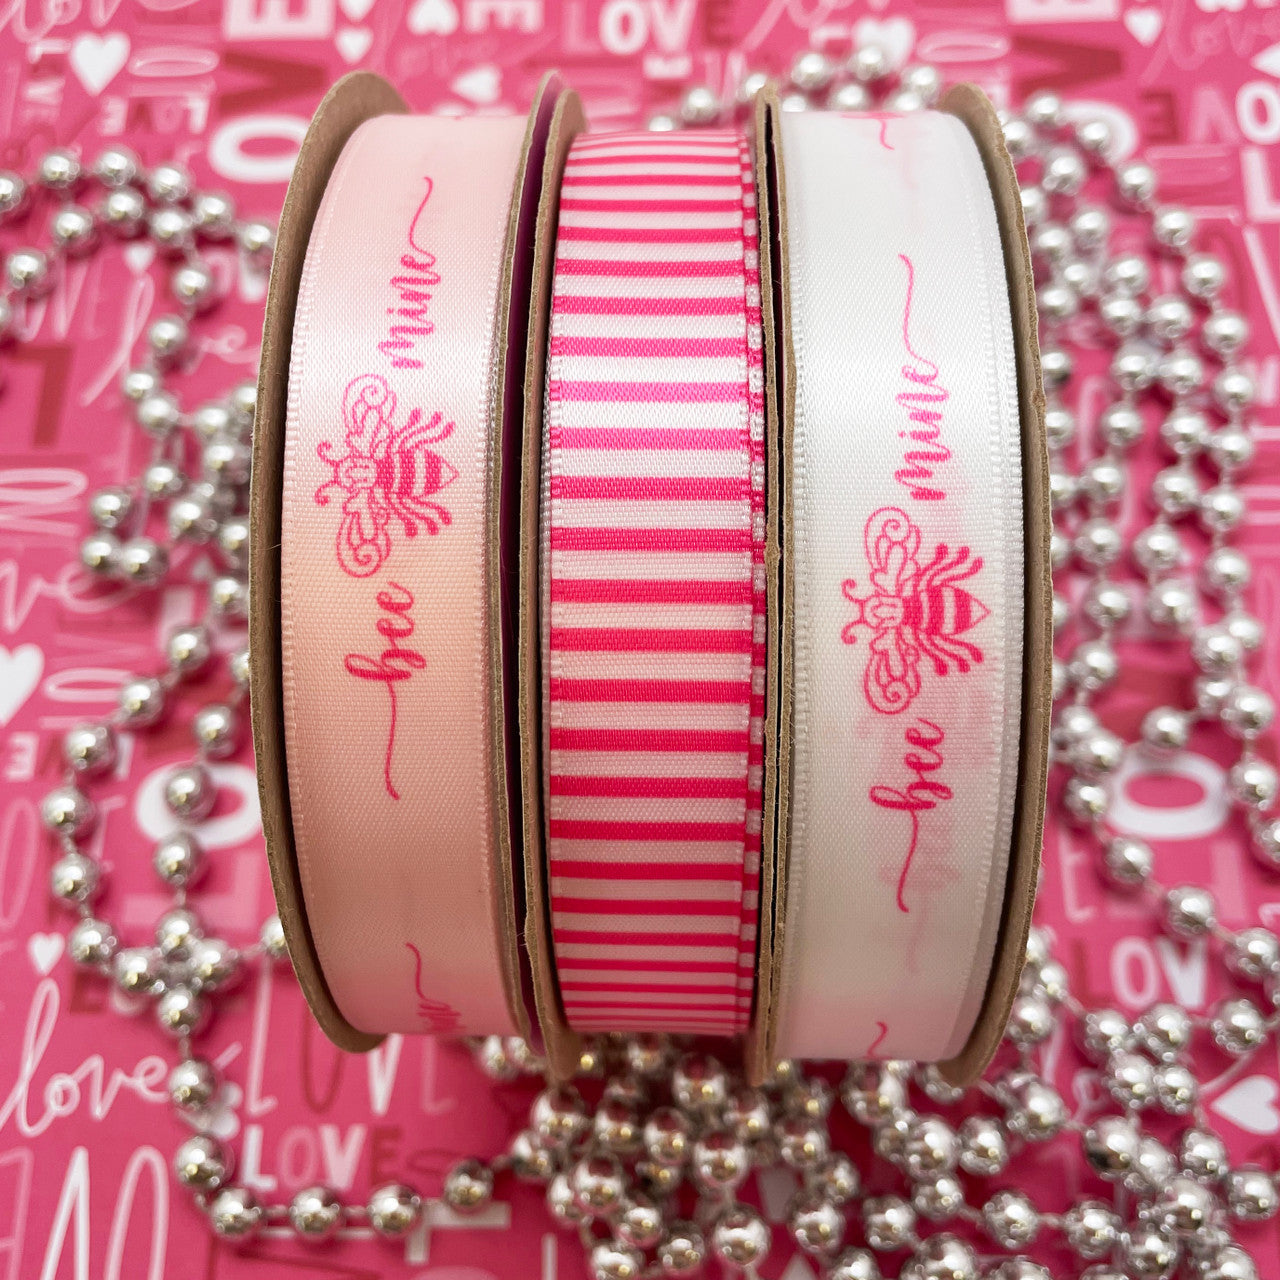 We love to mix and match our ribbons to create truly unique and beautiful Valentine card, gift or table scape!